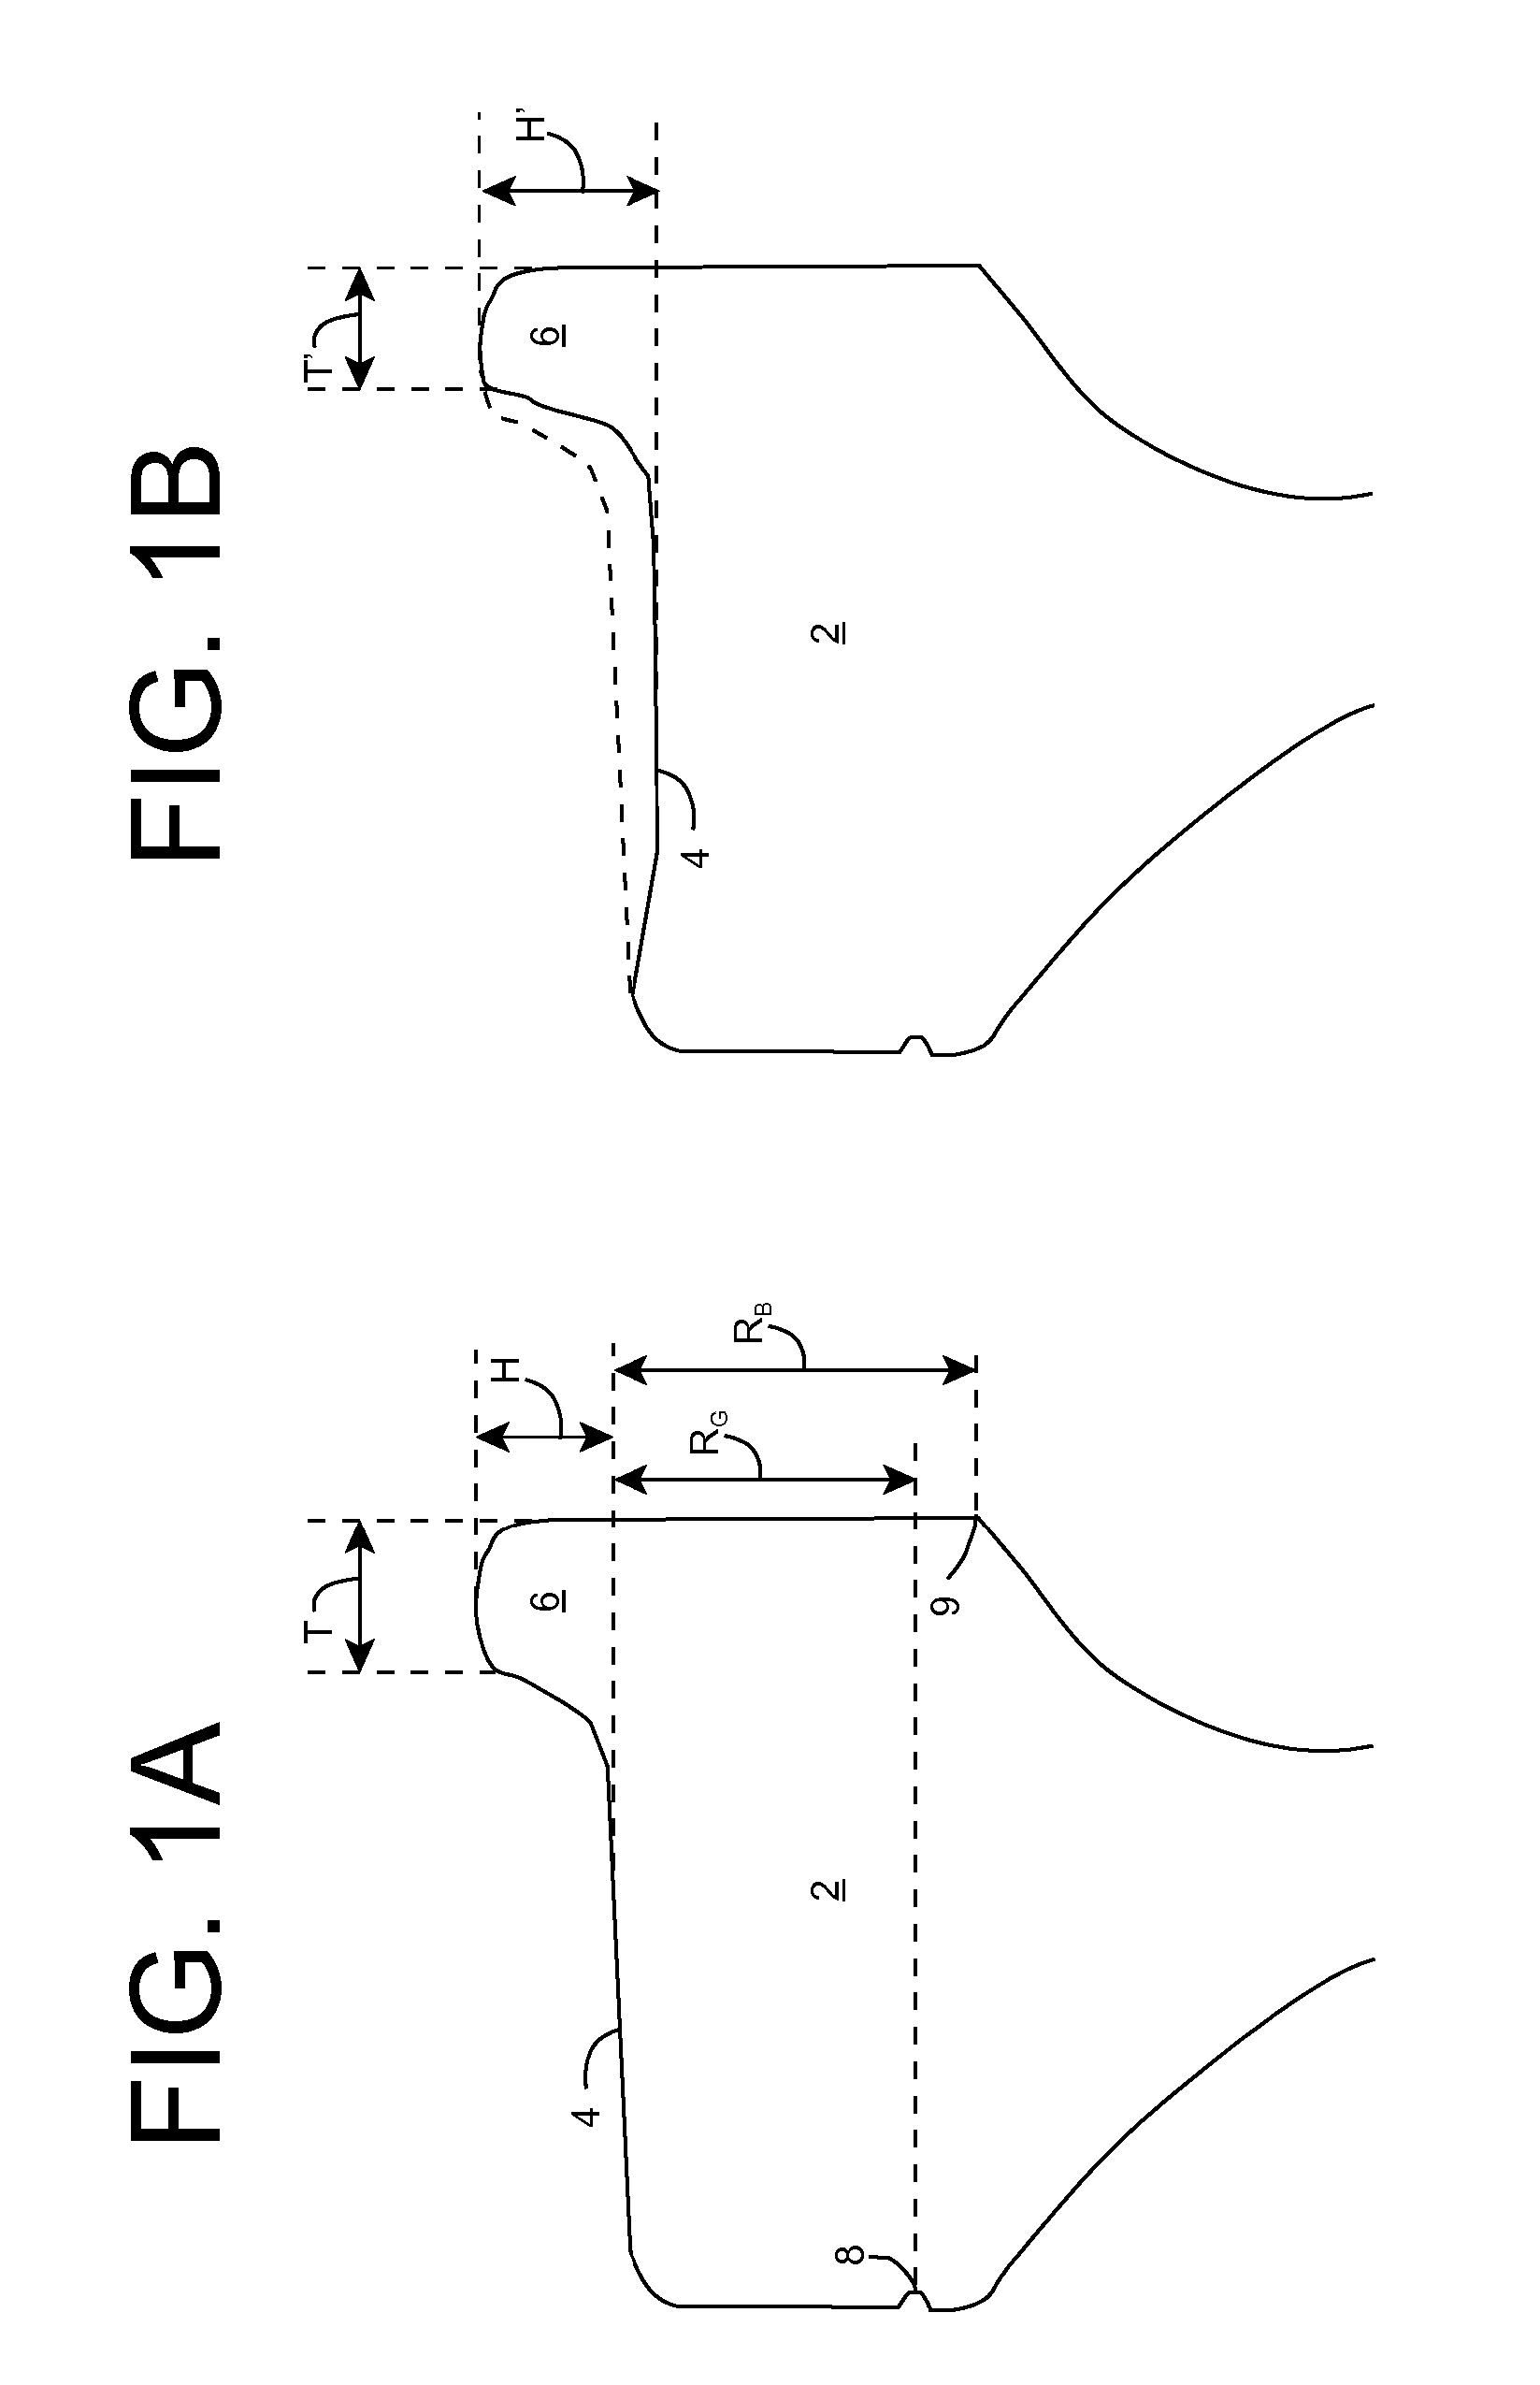 Wheel measurement systems and methods